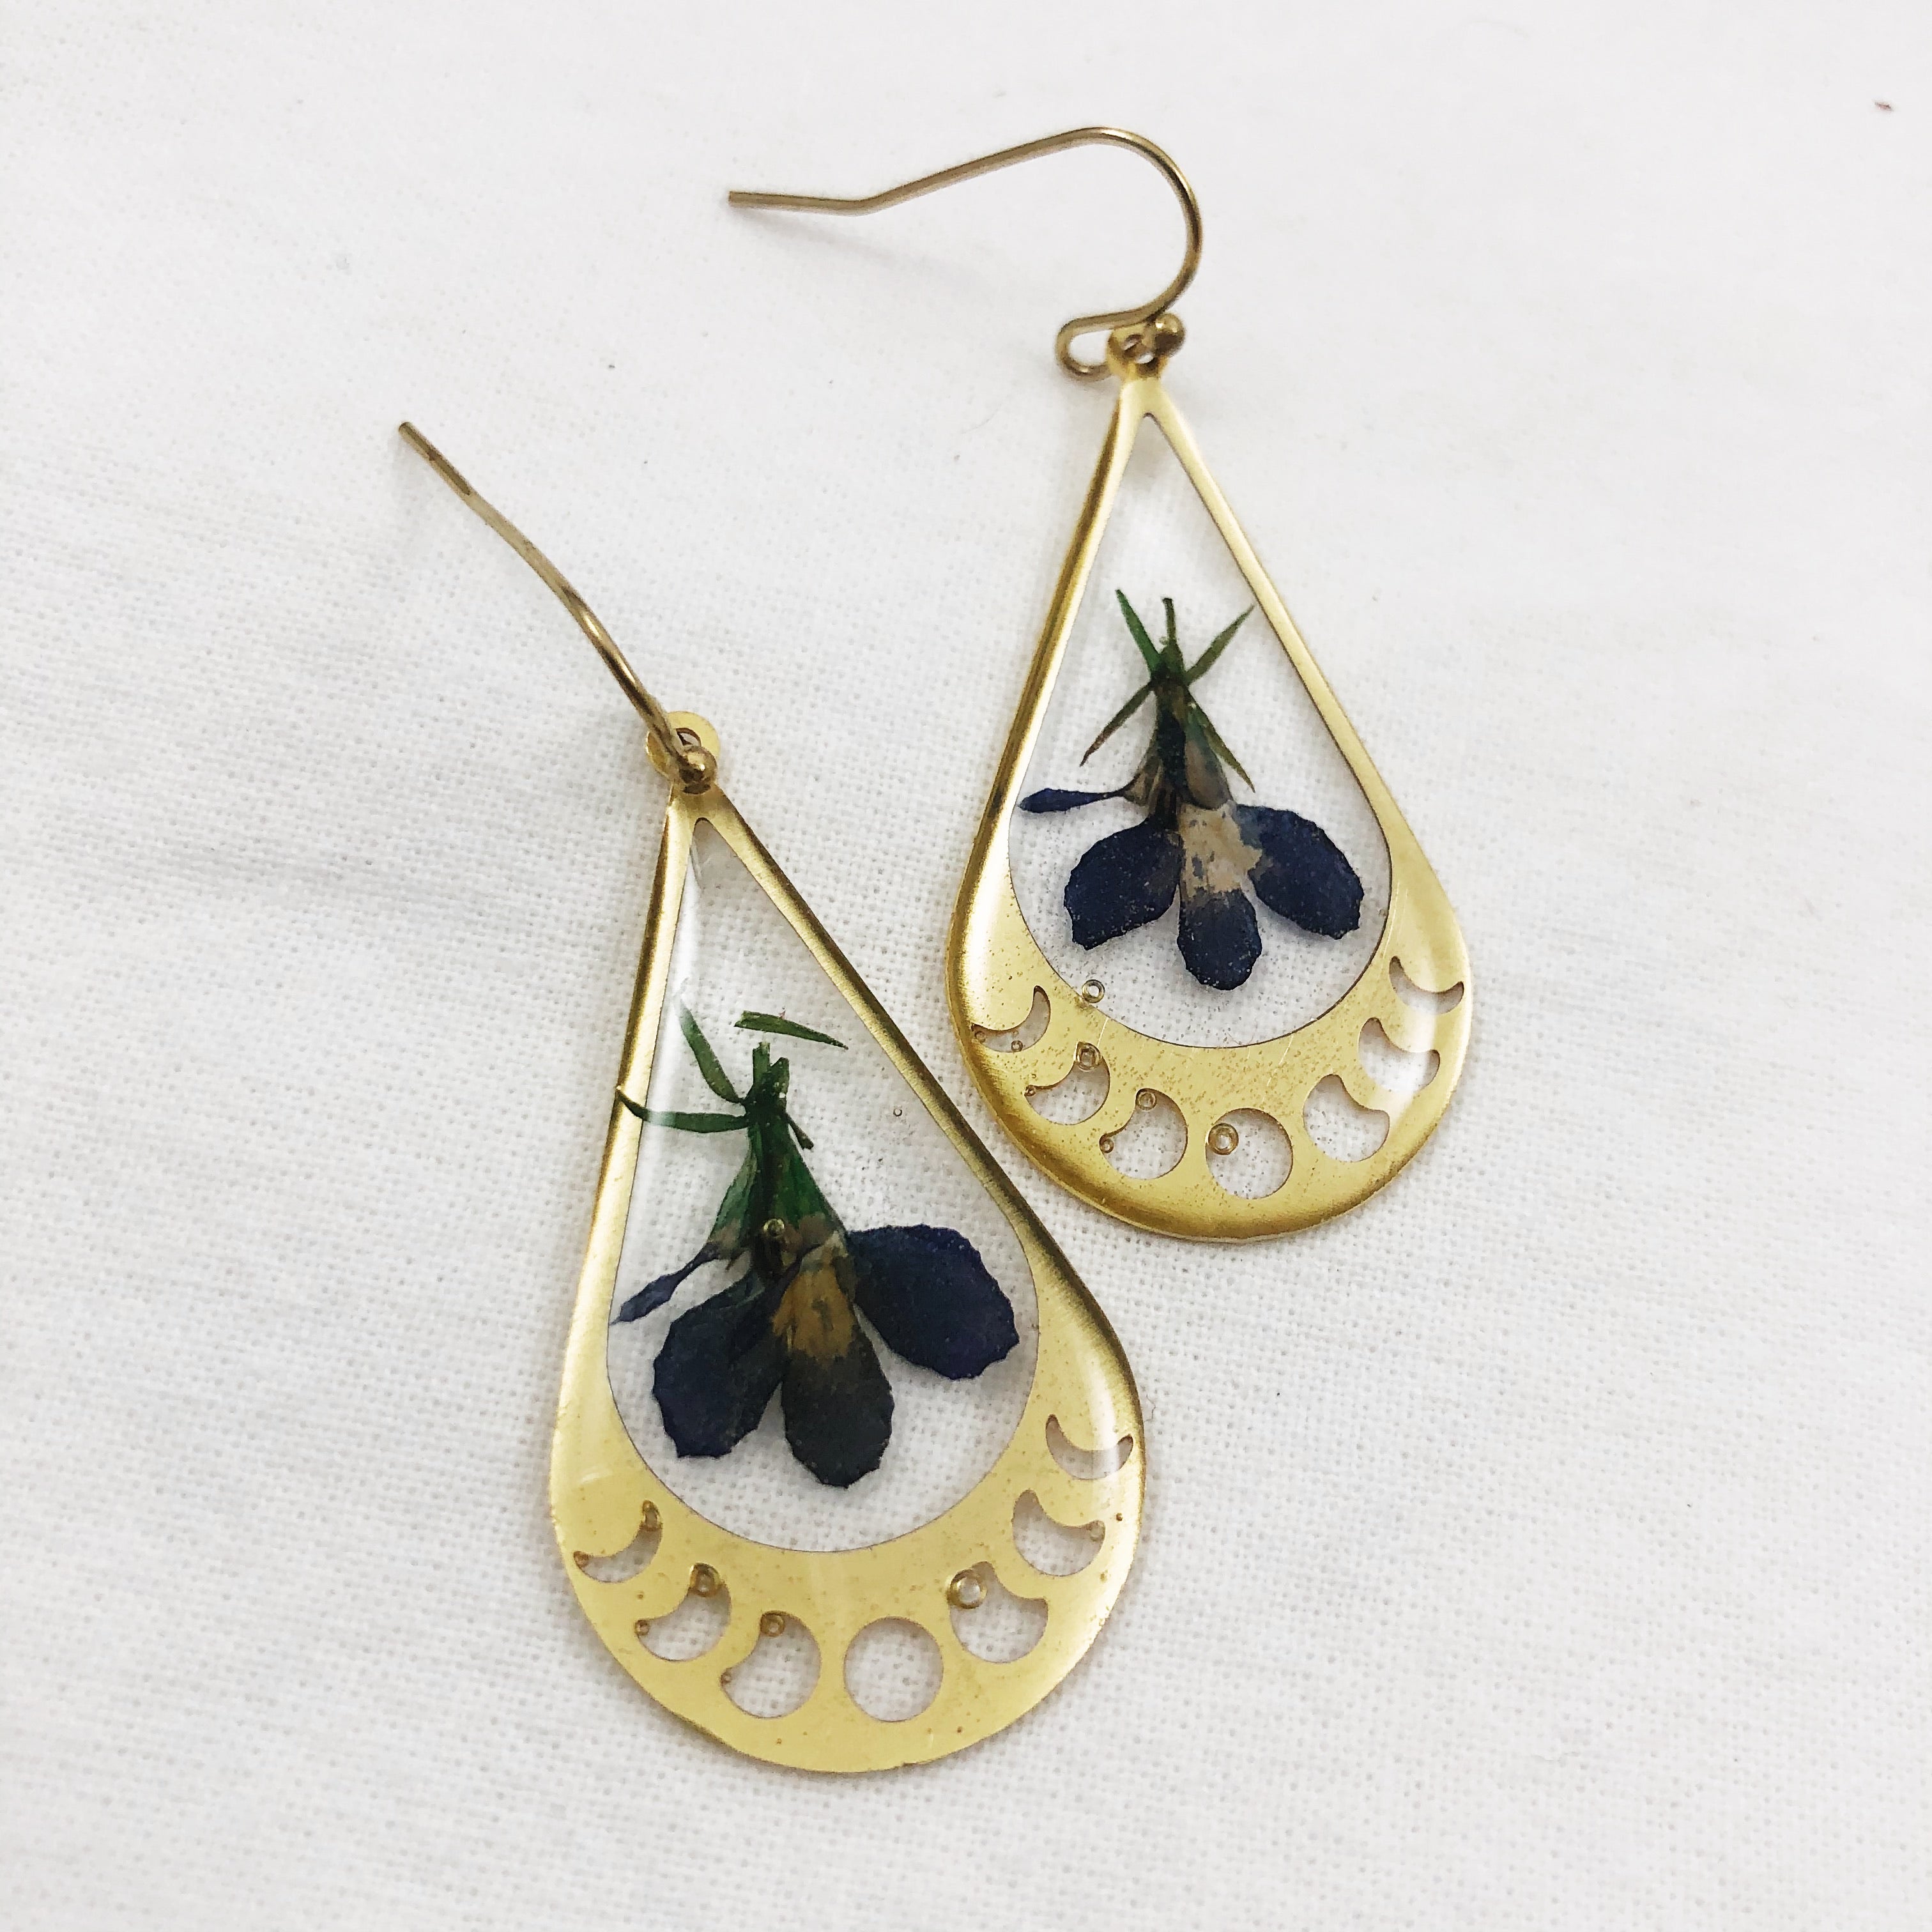 Brass Moon Phase Earrings with Pressed Flowers